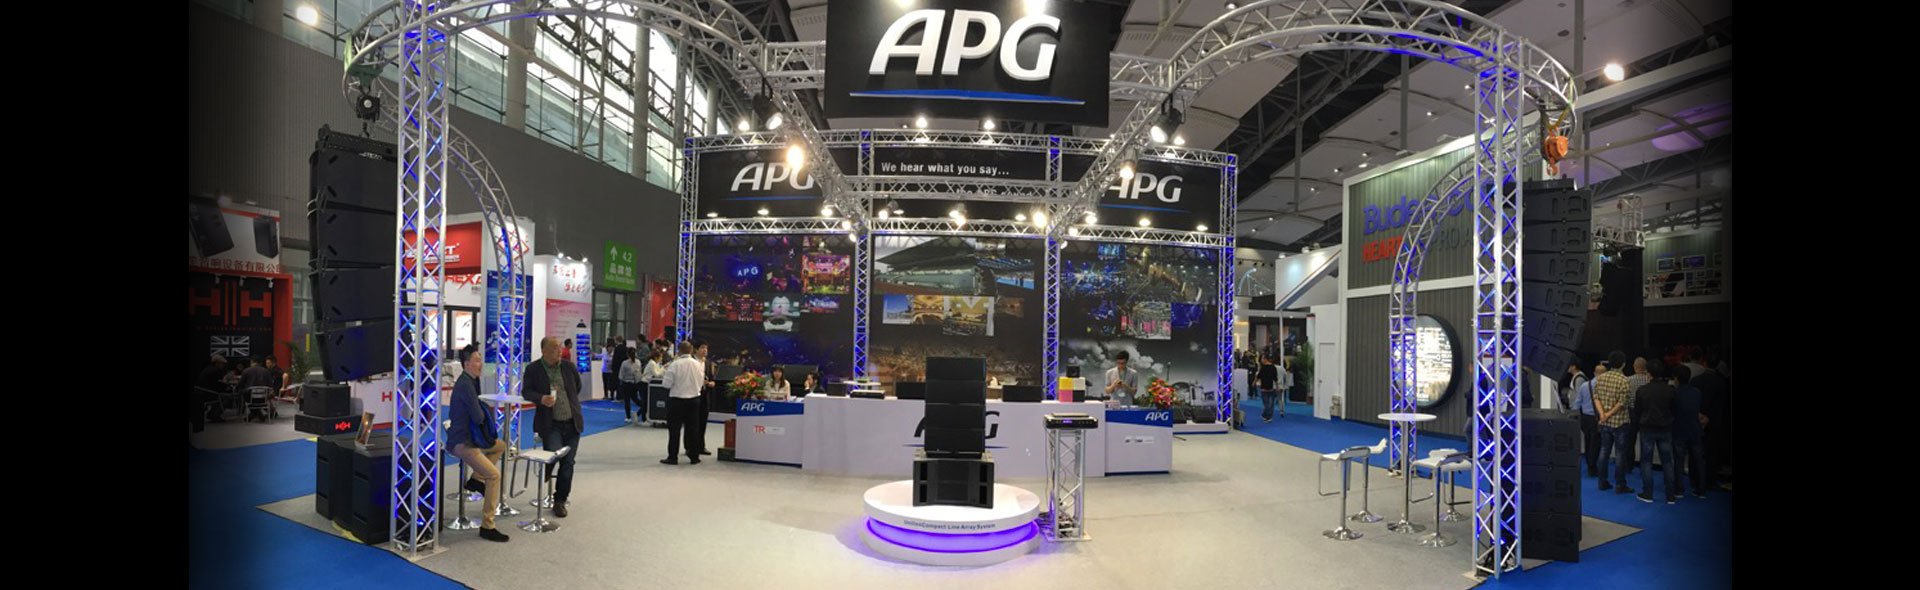 APG Strengthens Presence in Asia with New Distributor Appointments